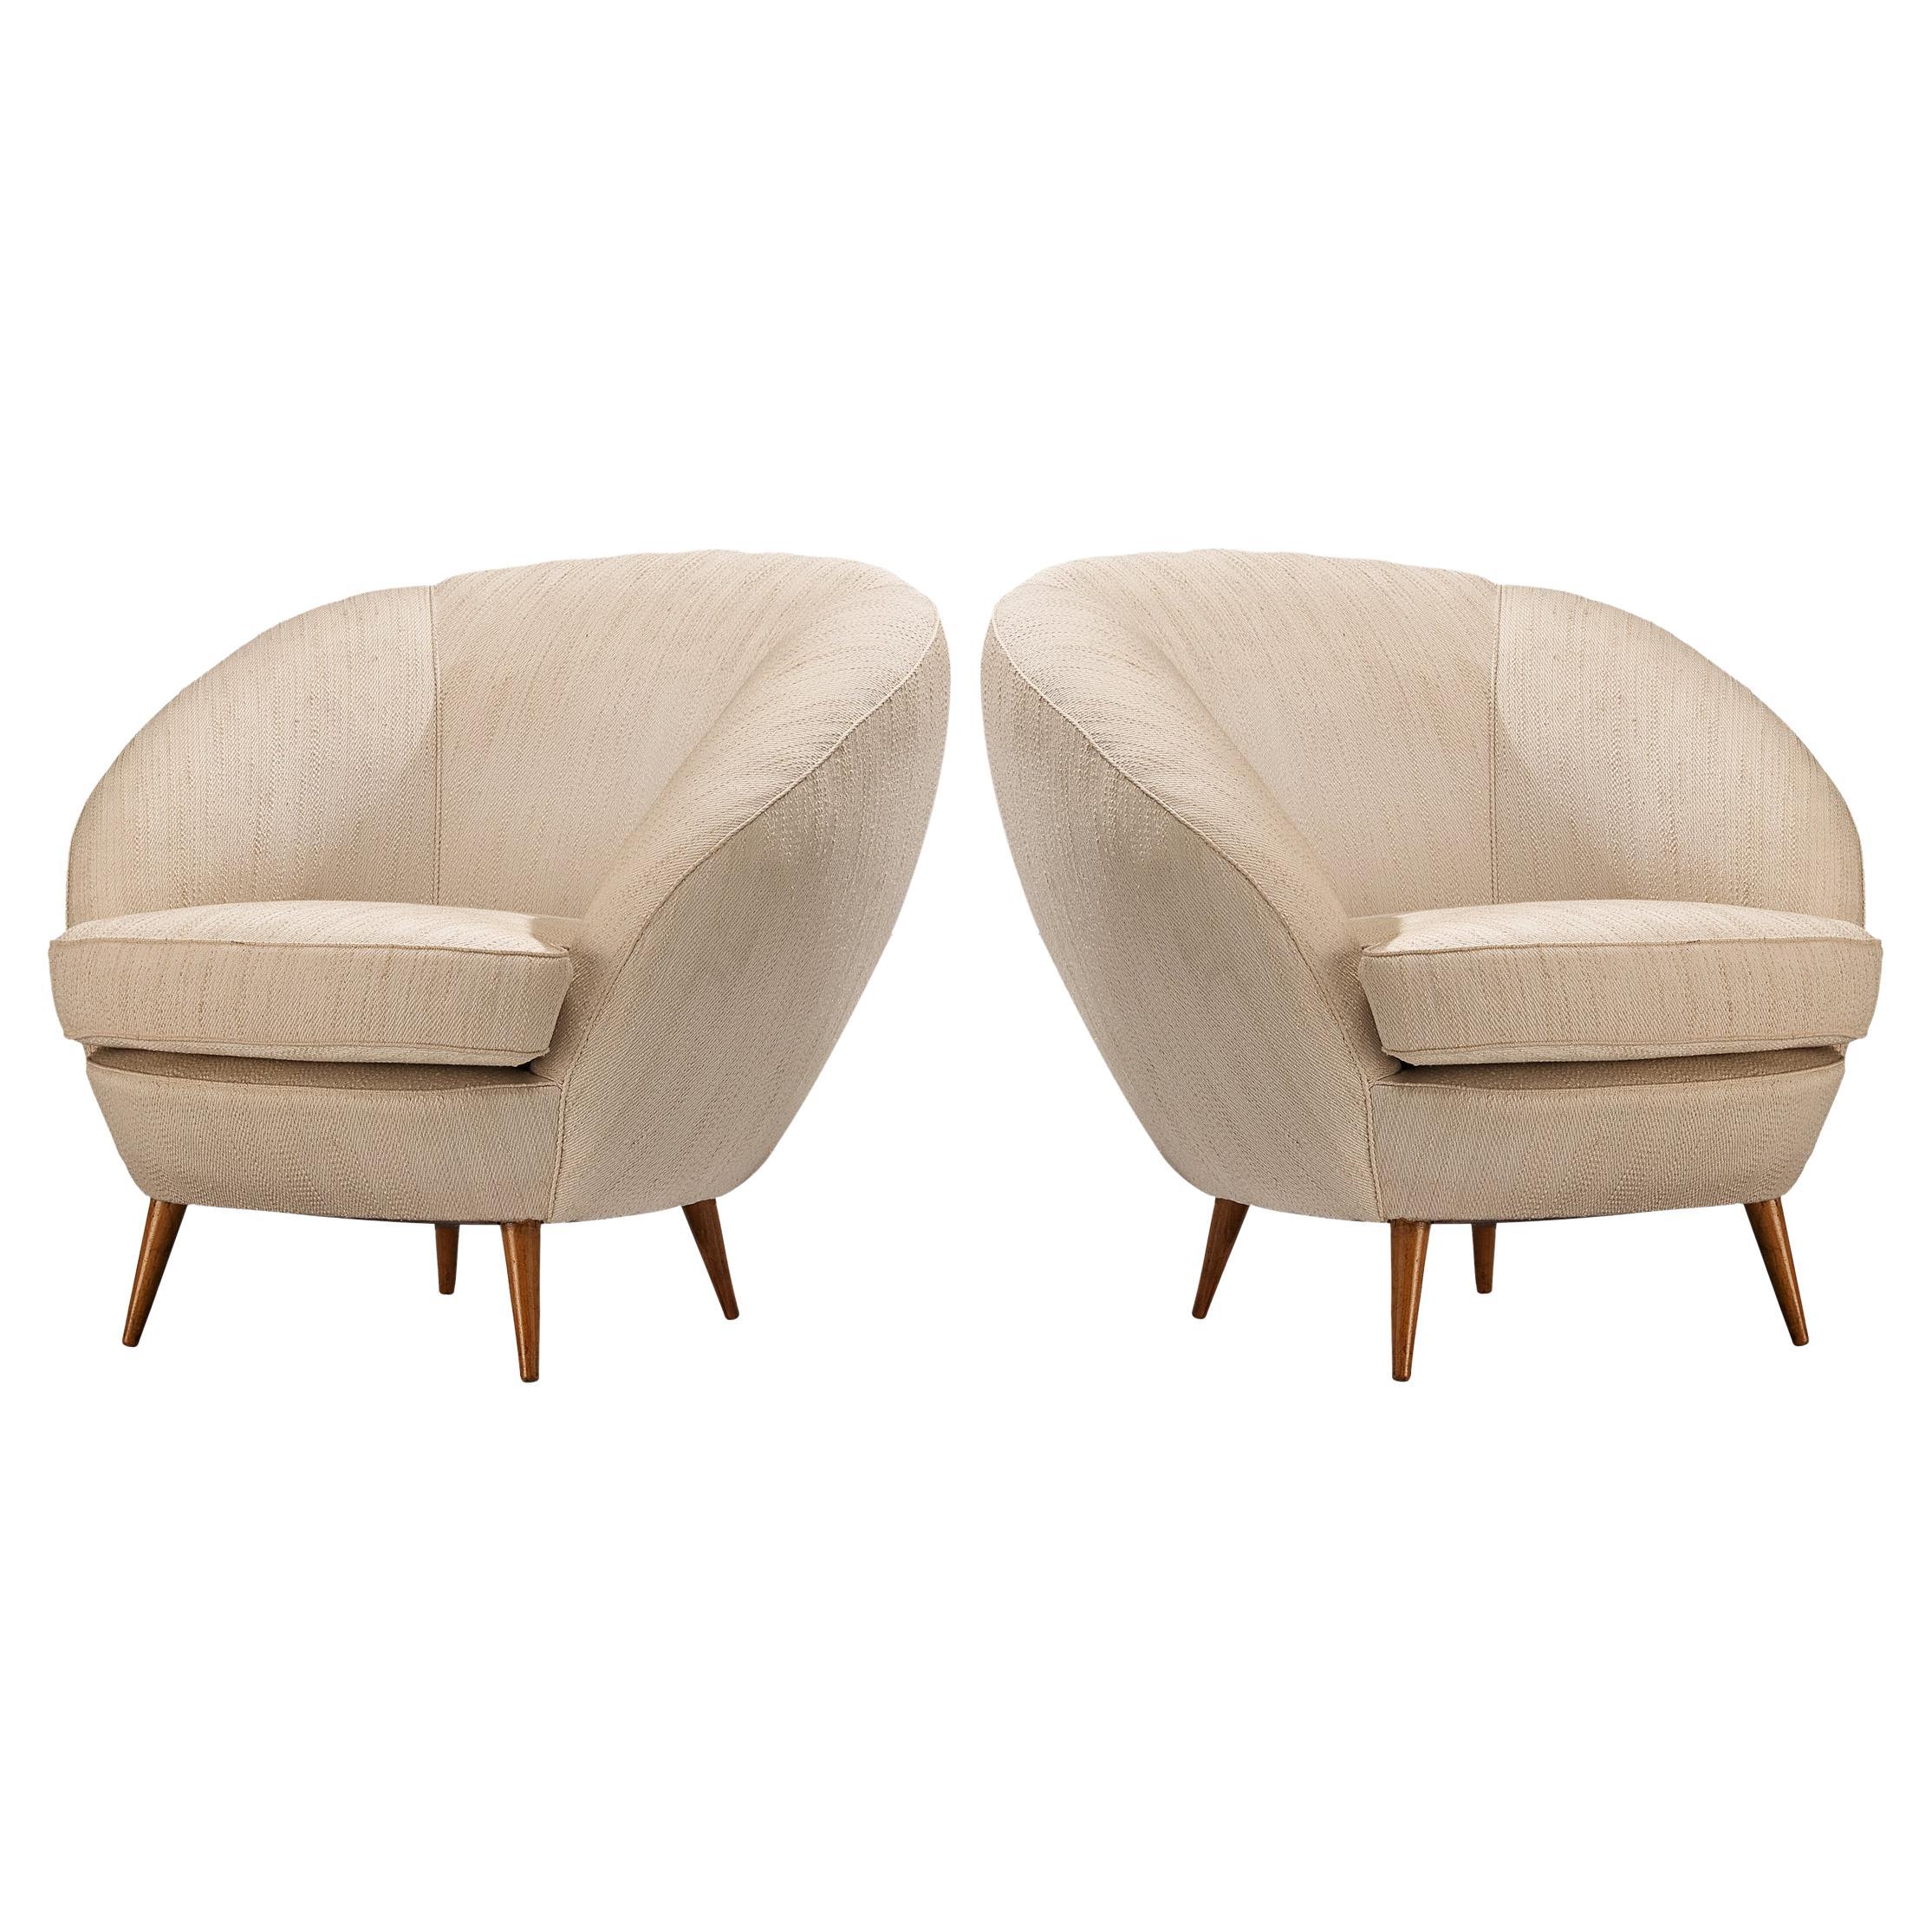 Grand Italian Pair Lounge Chairs in Off-White Upholstery (Paire de chaises longues italiennes en tissu Off-White) 